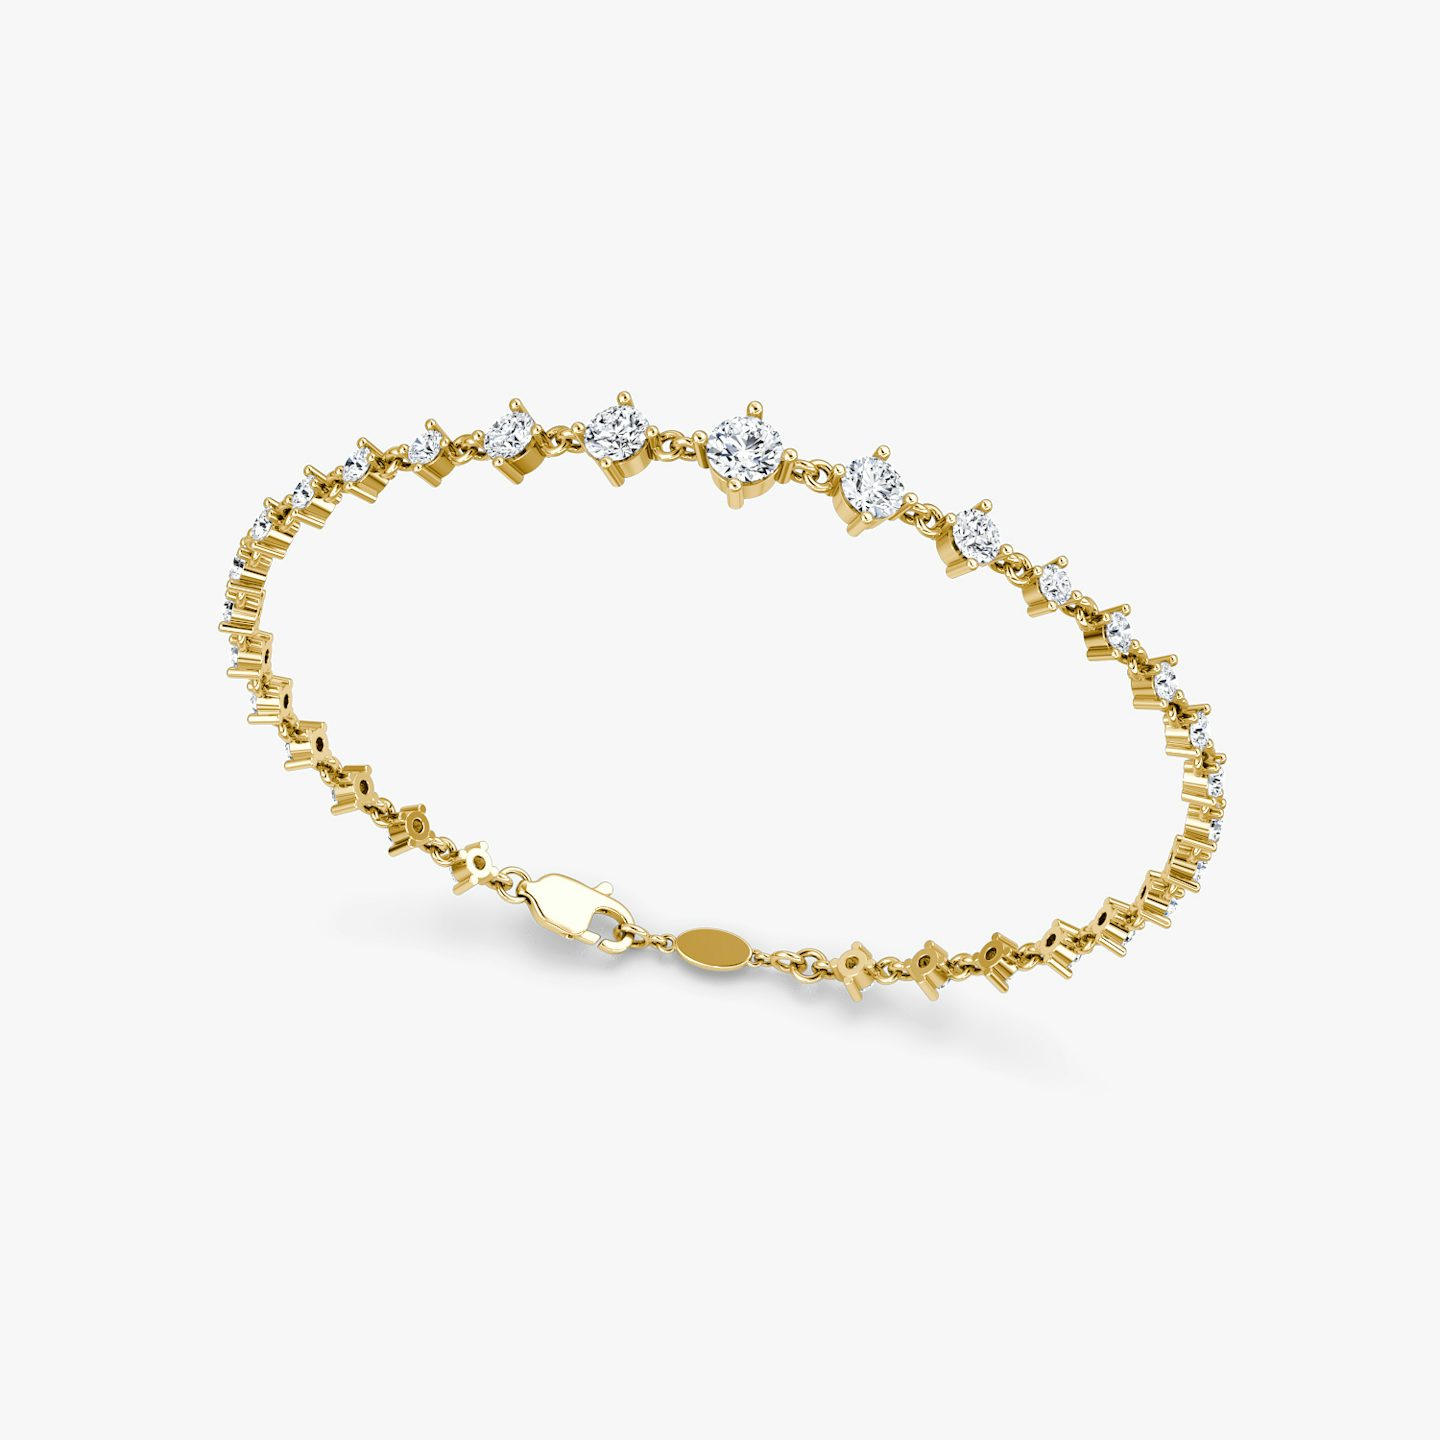 Bracelet Infinity Linked Tennis | round-brilliant | 14k | yellow-gold | caratWeight: 1.7ct | chainLength: 6.5